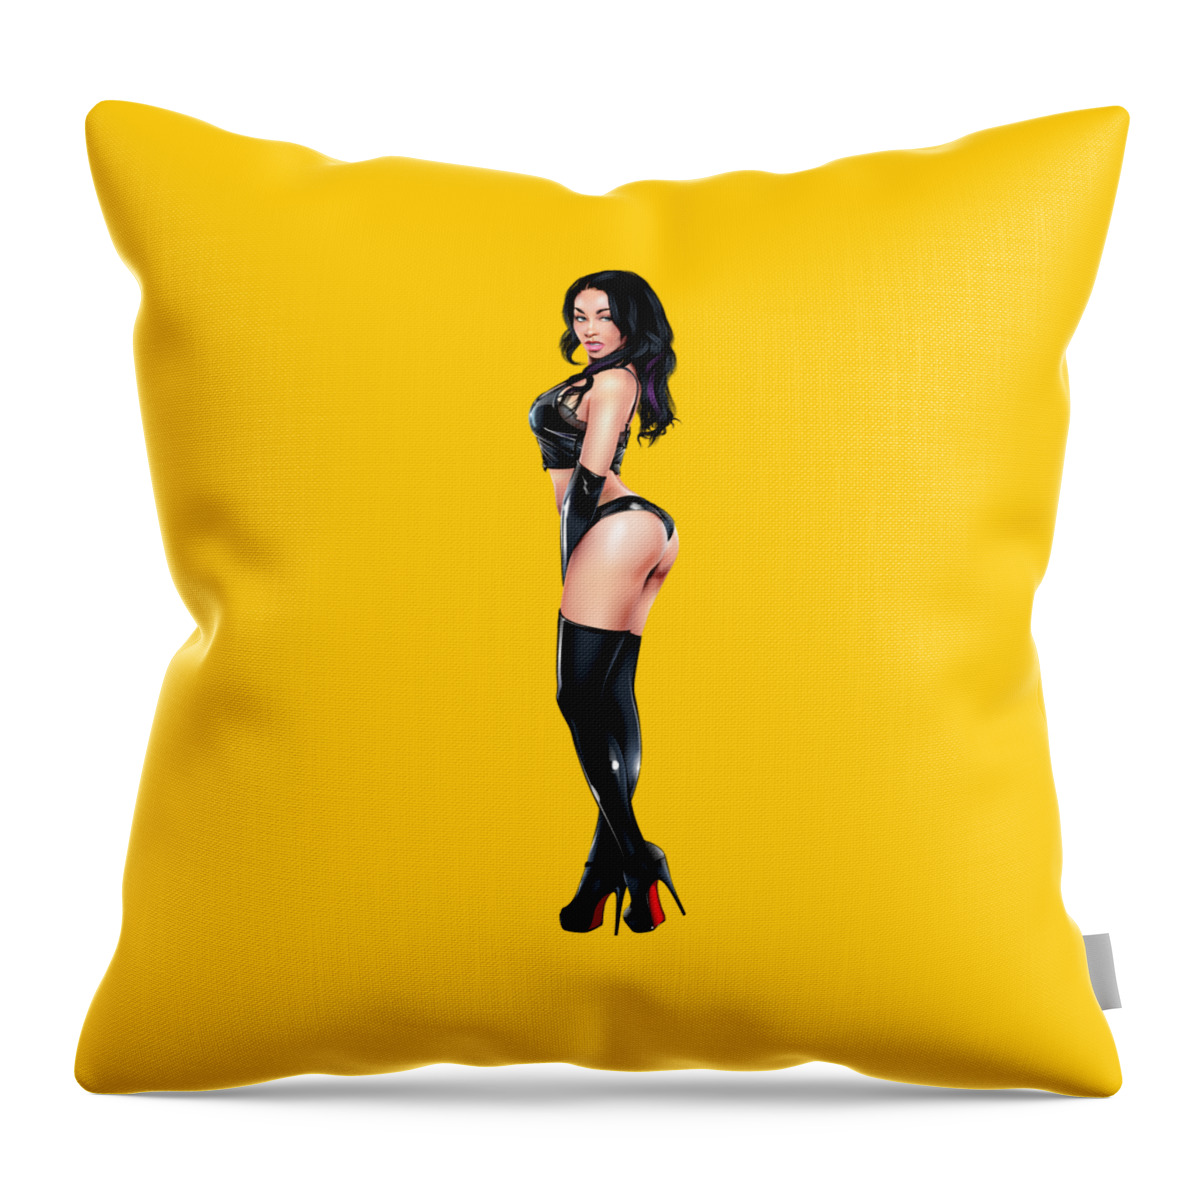 Pin-up Throw Pillow featuring the digital art Pin-up Latex by Brian Gibbs